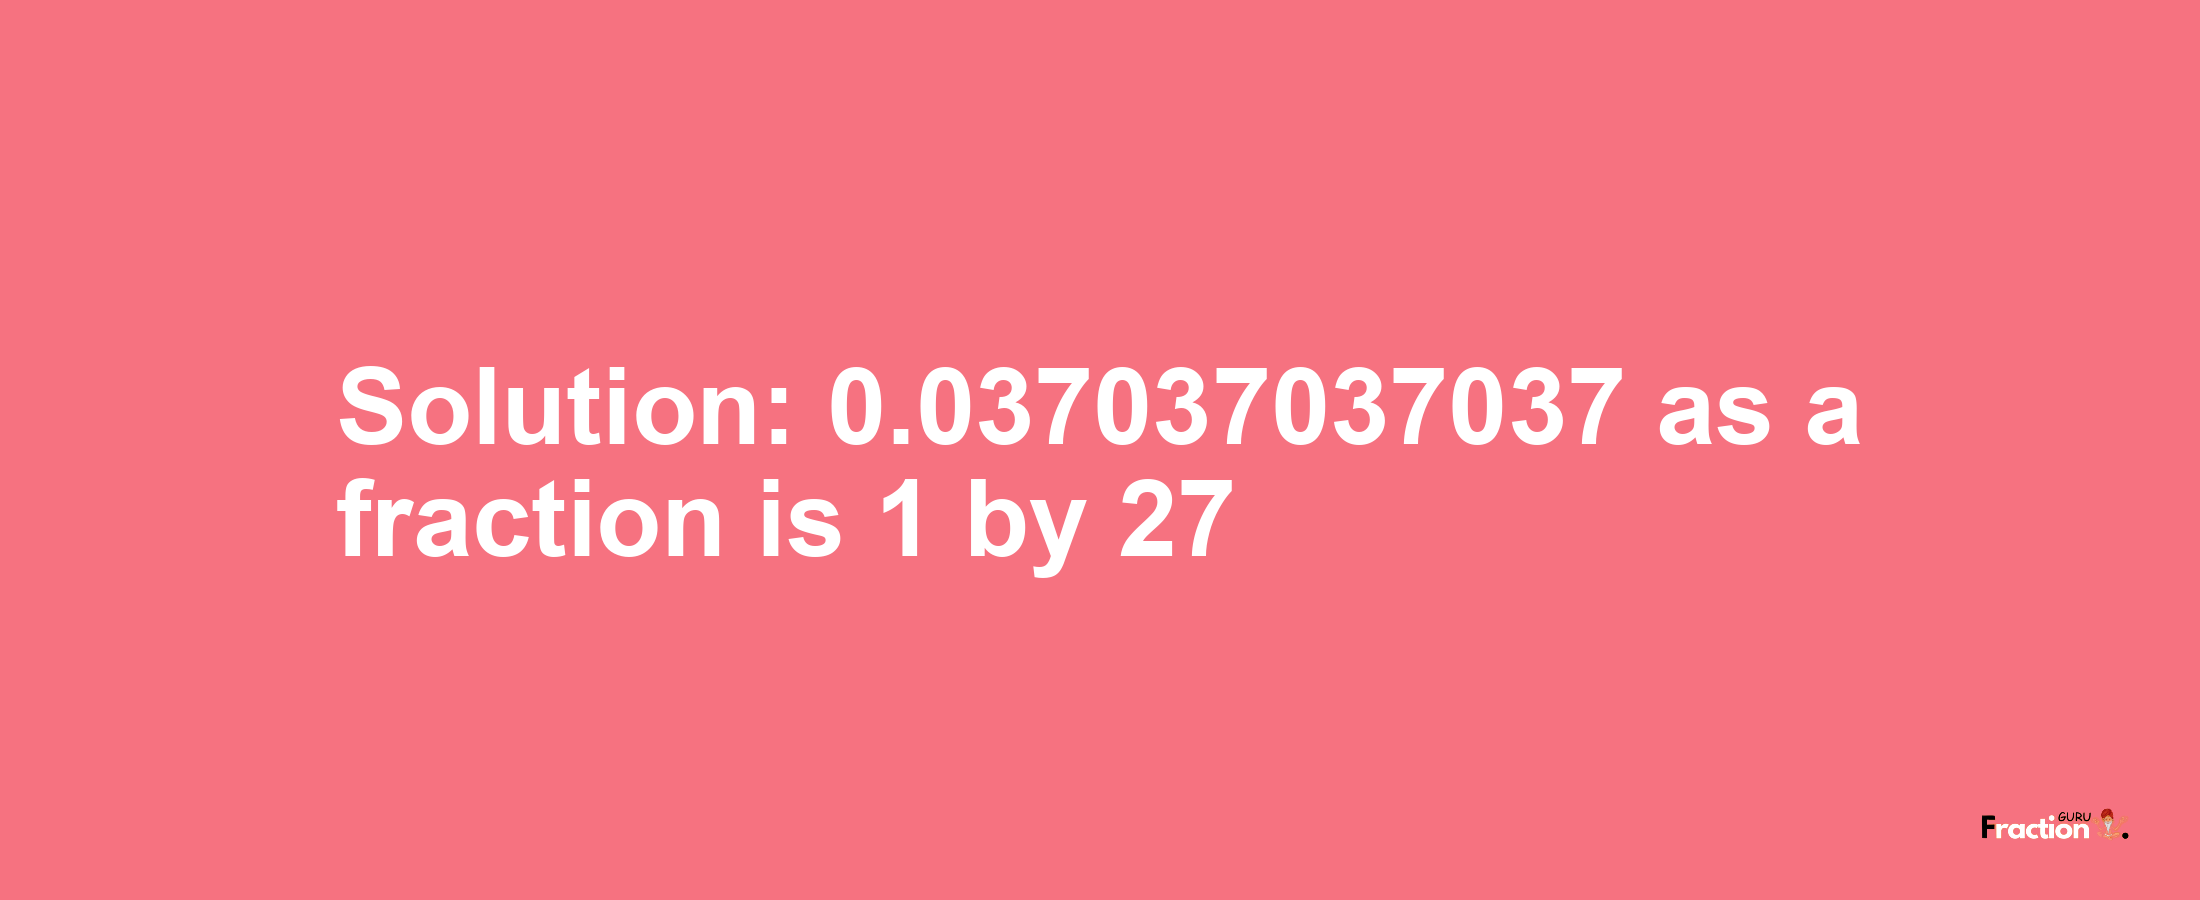 Solution:0.037037037037 as a fraction is 1/27